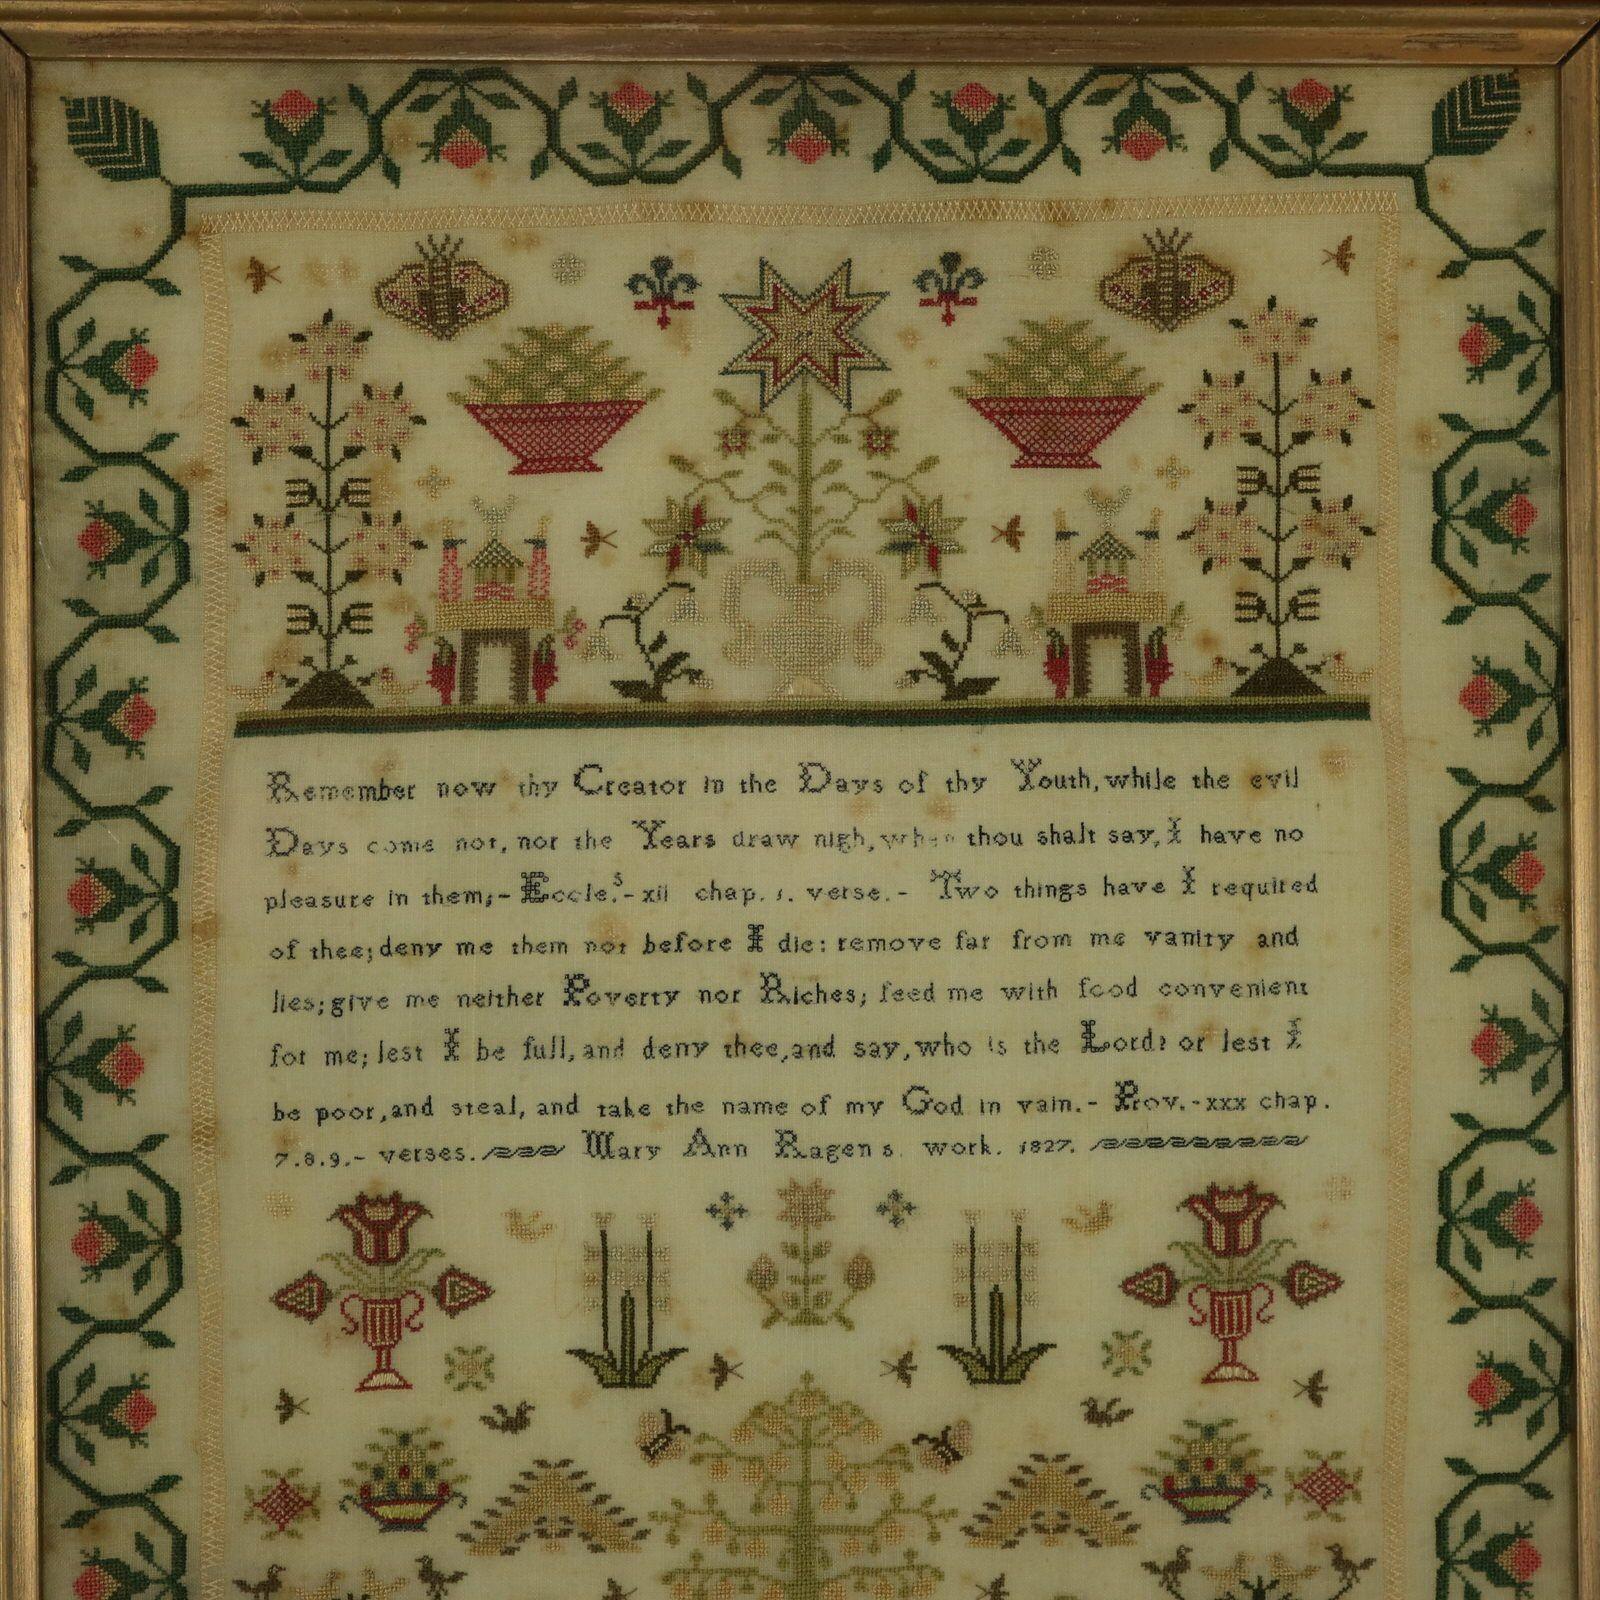 Regency period Sampler, 1827, by Mary Ann Ragen. The sampler is finely worked in silk threads on a linen ground, mainly in cross stitch. Meandering strawberry border. Colours green, red, gold, pink and brown. Verse reads, 'Remember now thy Creator